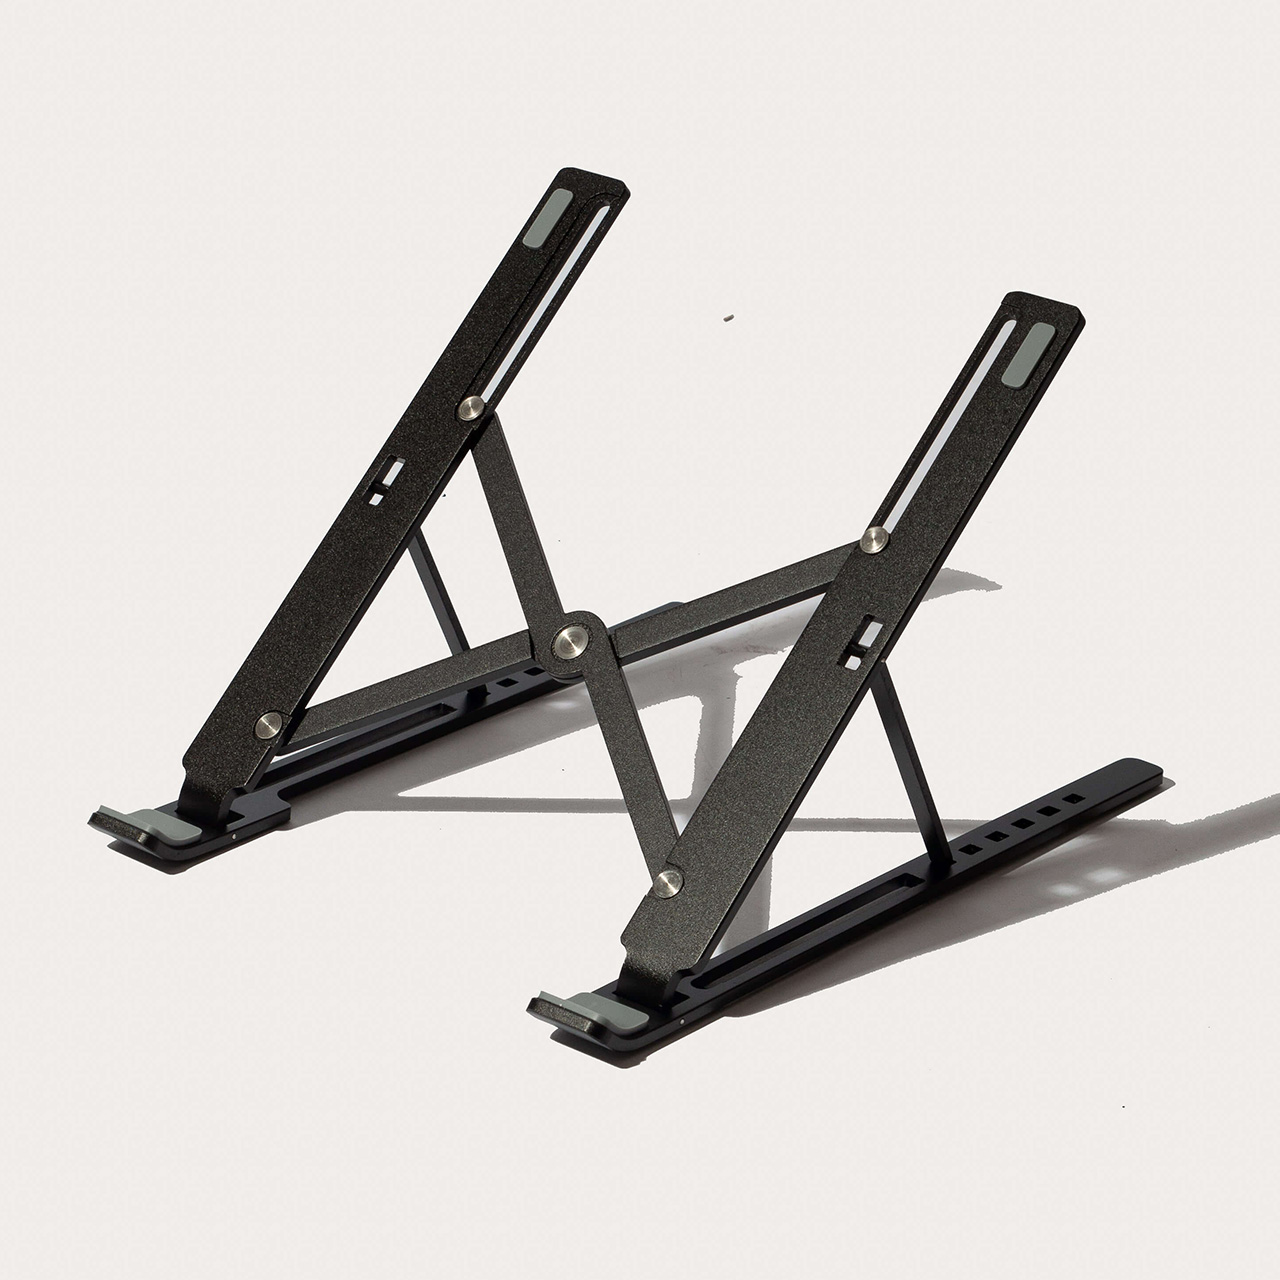 Stance X Laptop Stand- Portable and Foldable Aluminum Adjustable  Multi-Level Riser For Your Desk with Anti-slip Rubbers